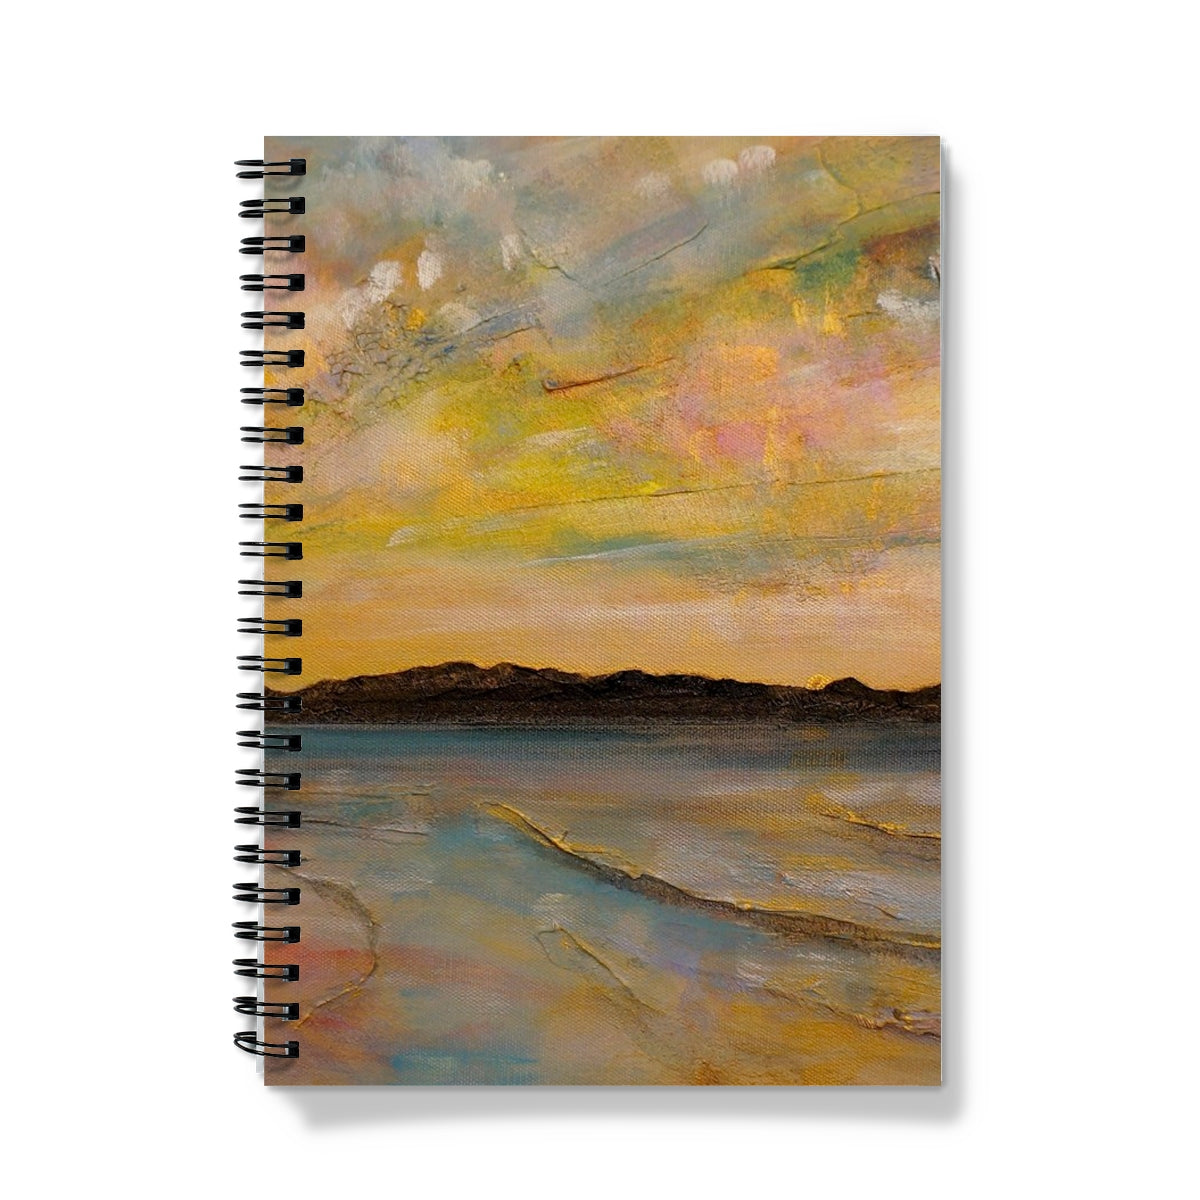 Vallay Island North Uist Art Gifts Notebook-Journals & Notebooks-Hebridean Islands Art Gallery-A4-Lined-Paintings, Prints, Homeware, Art Gifts From Scotland By Scottish Artist Kevin Hunter